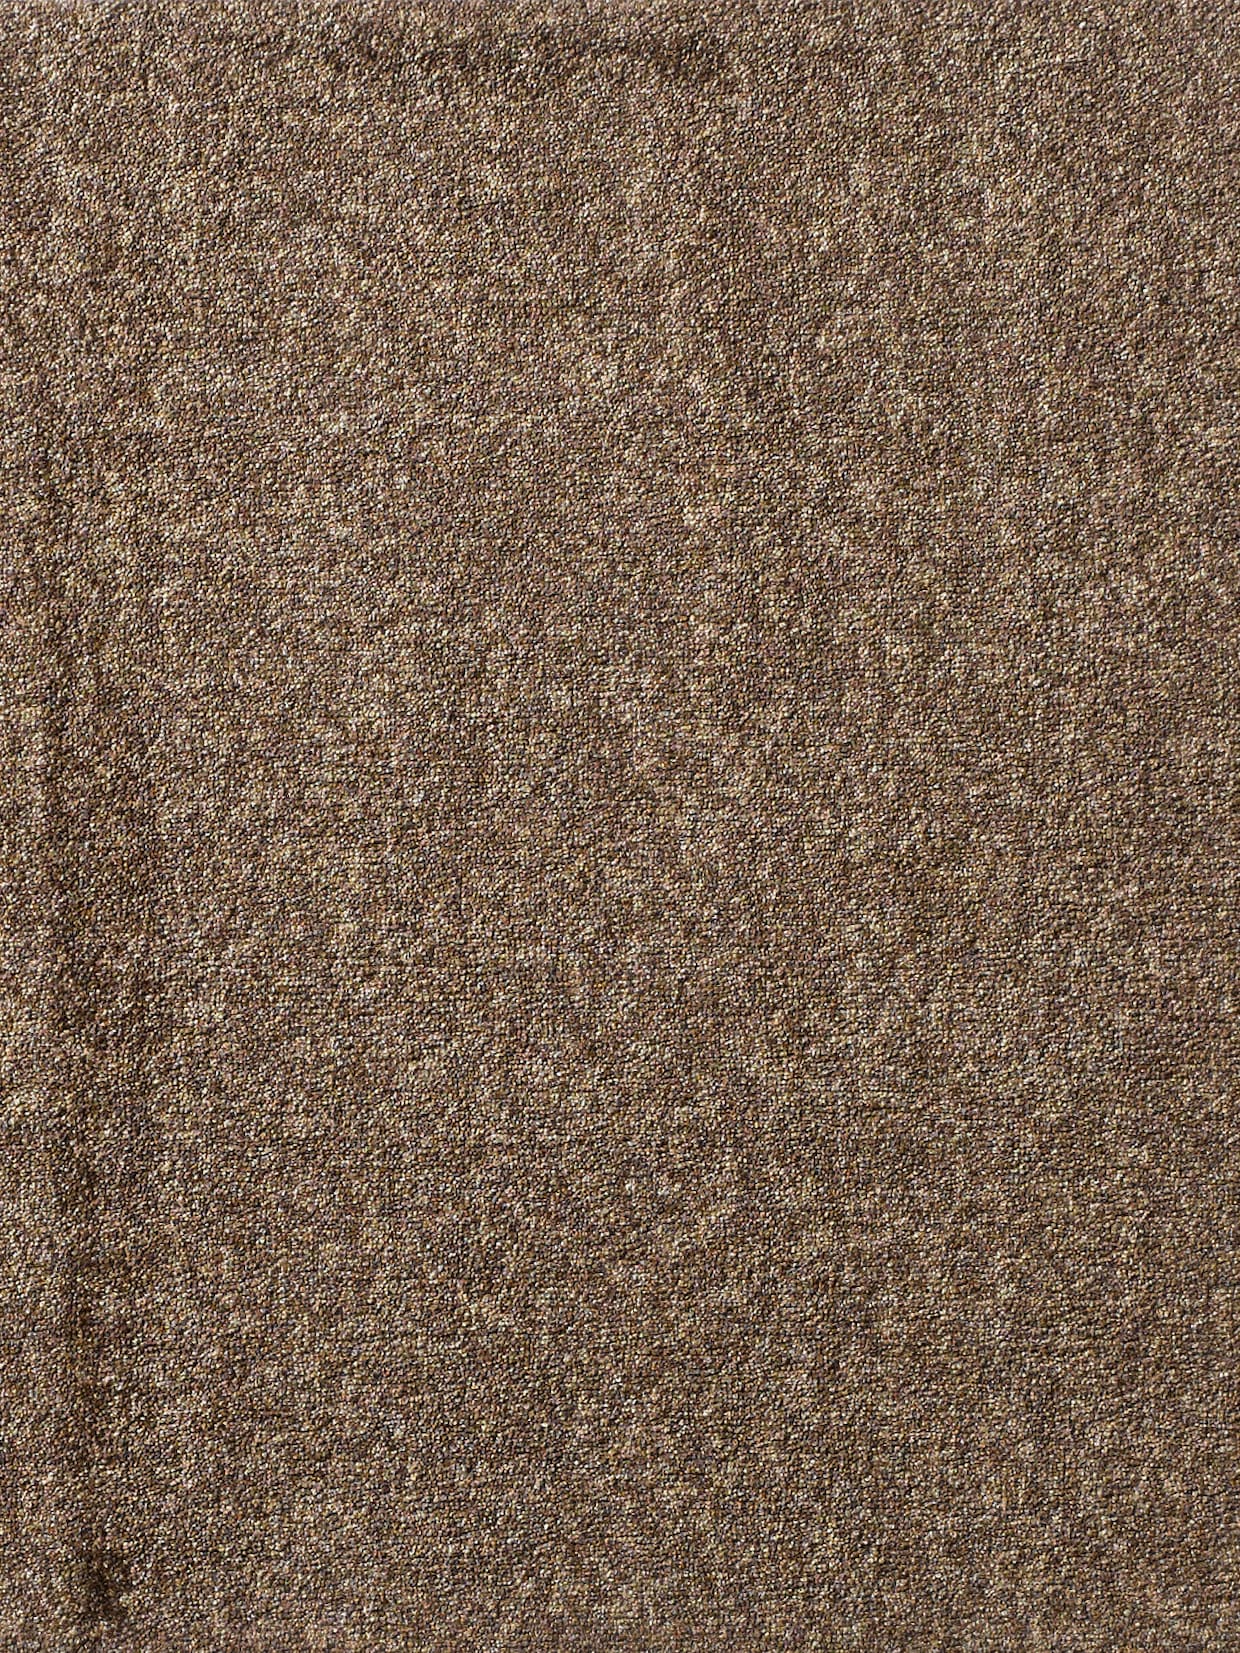 wash&dry Voetmat - taupe